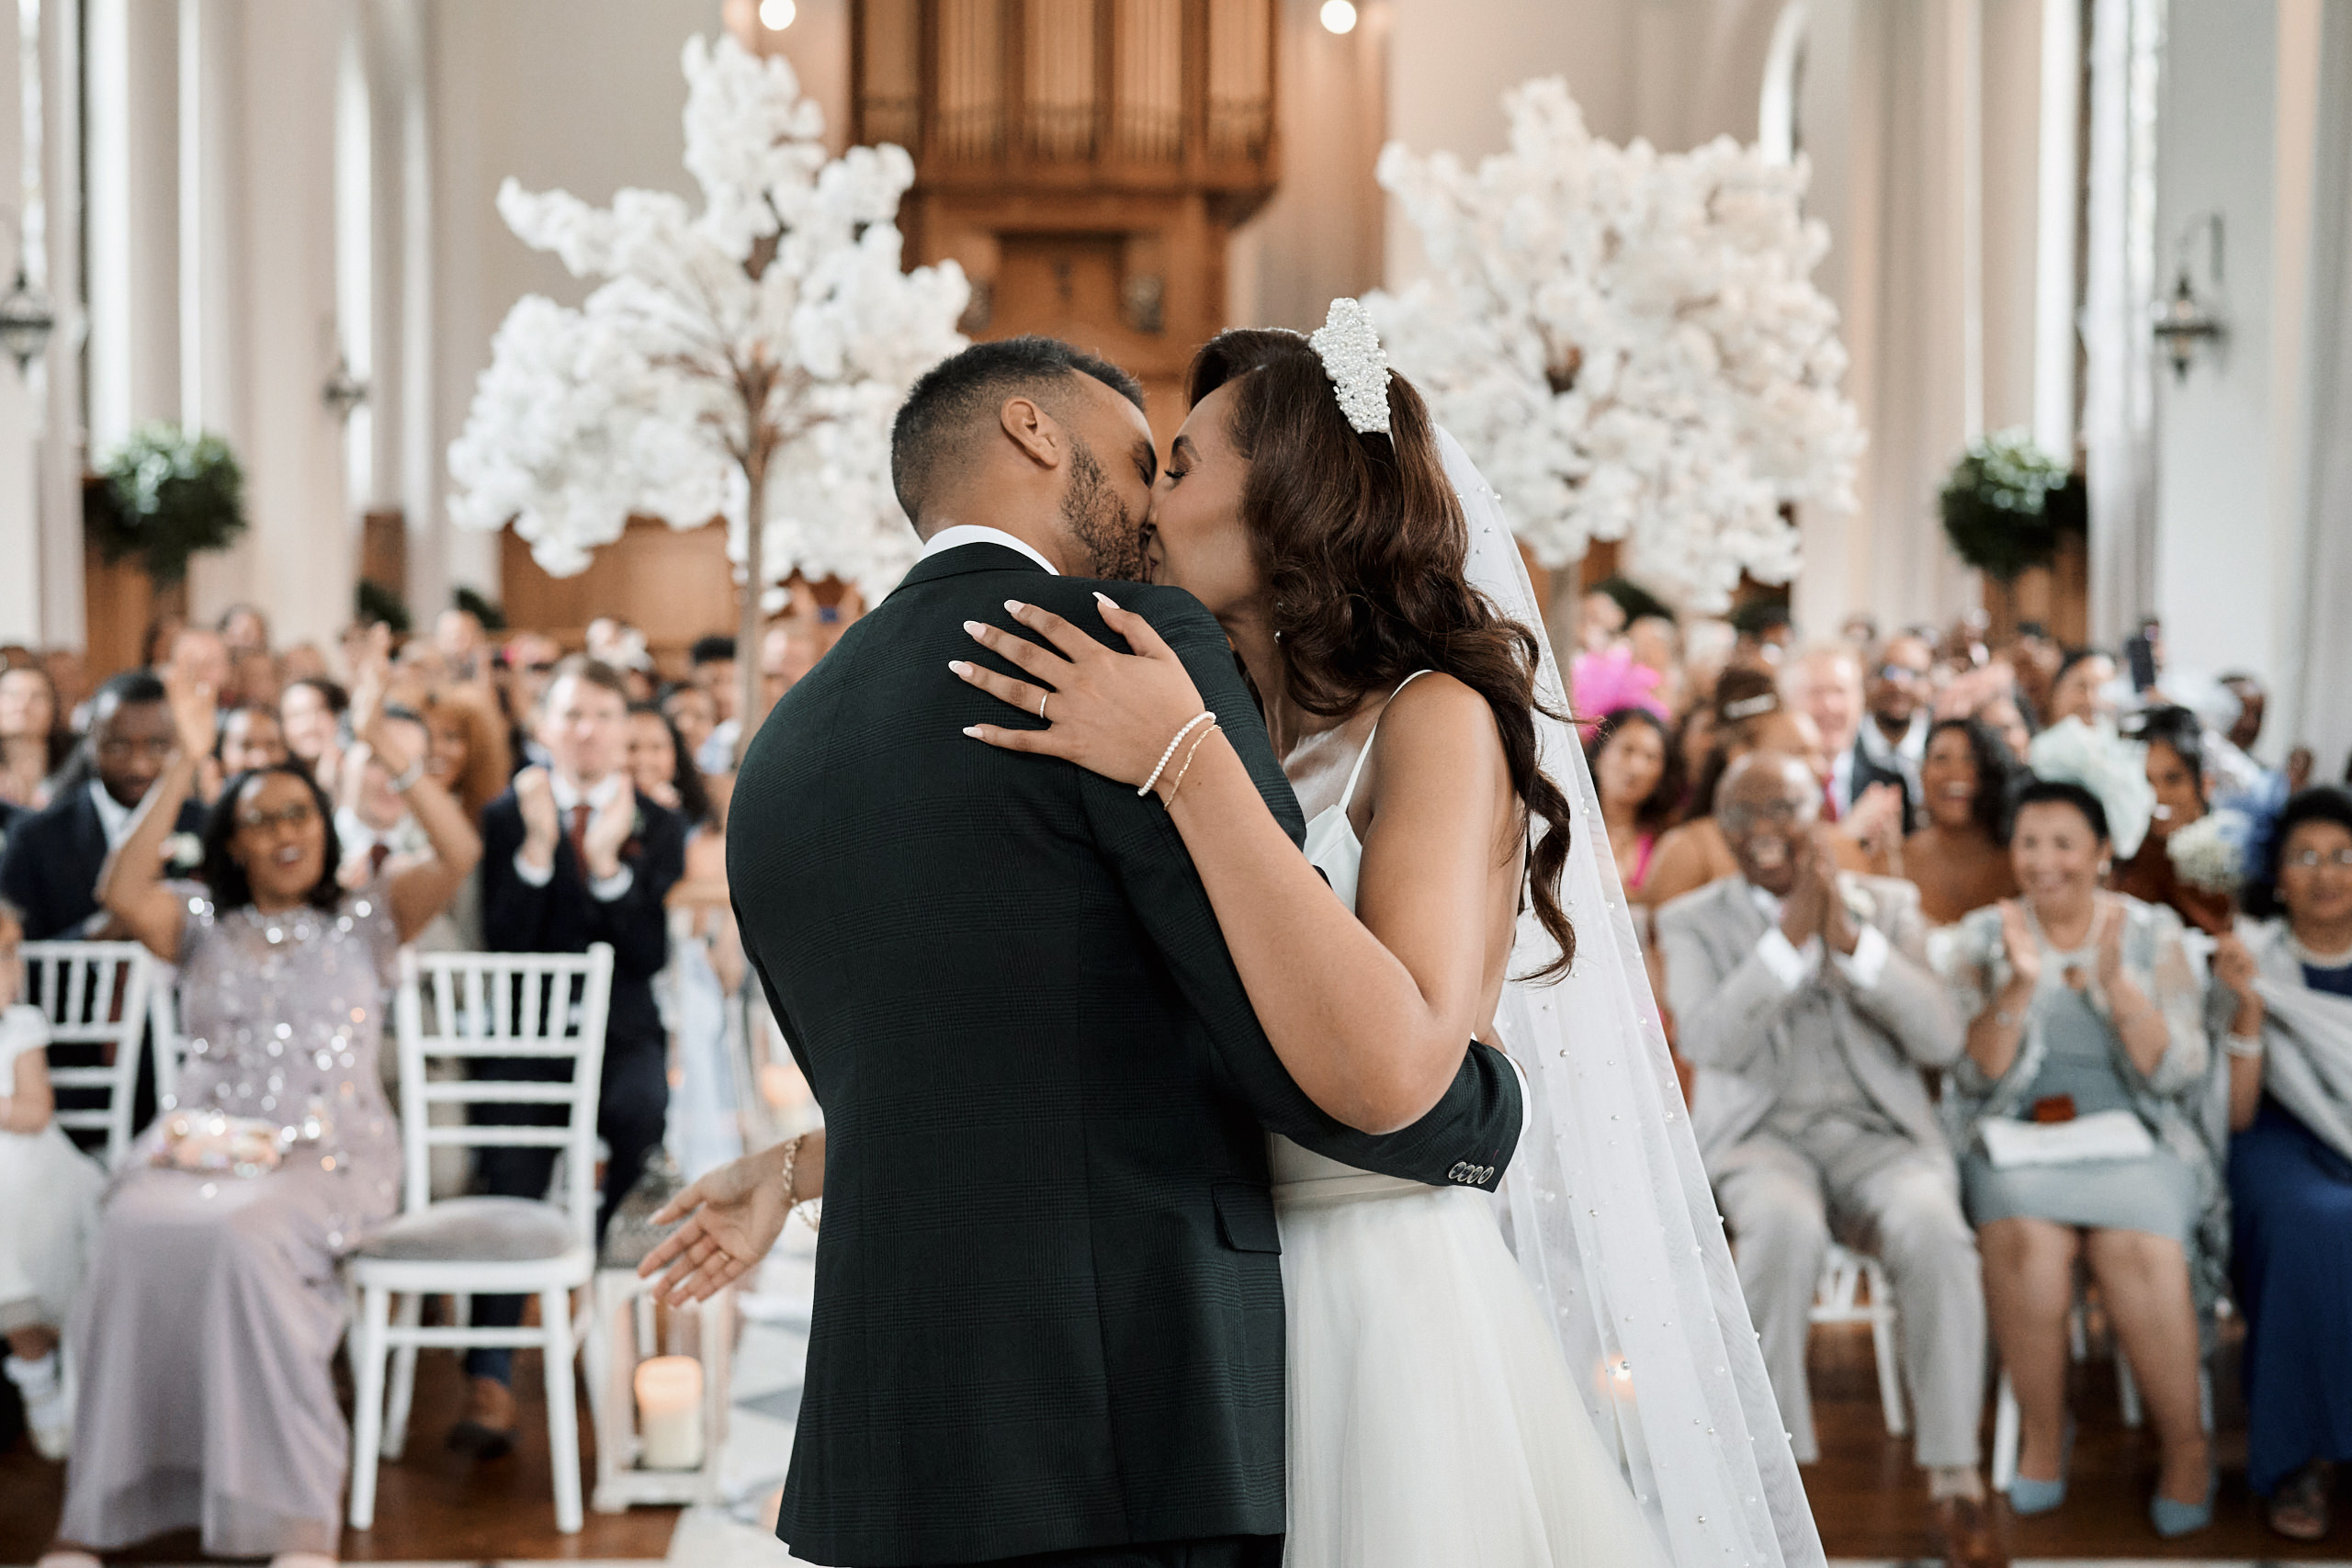 A couple kisses during their wedding.